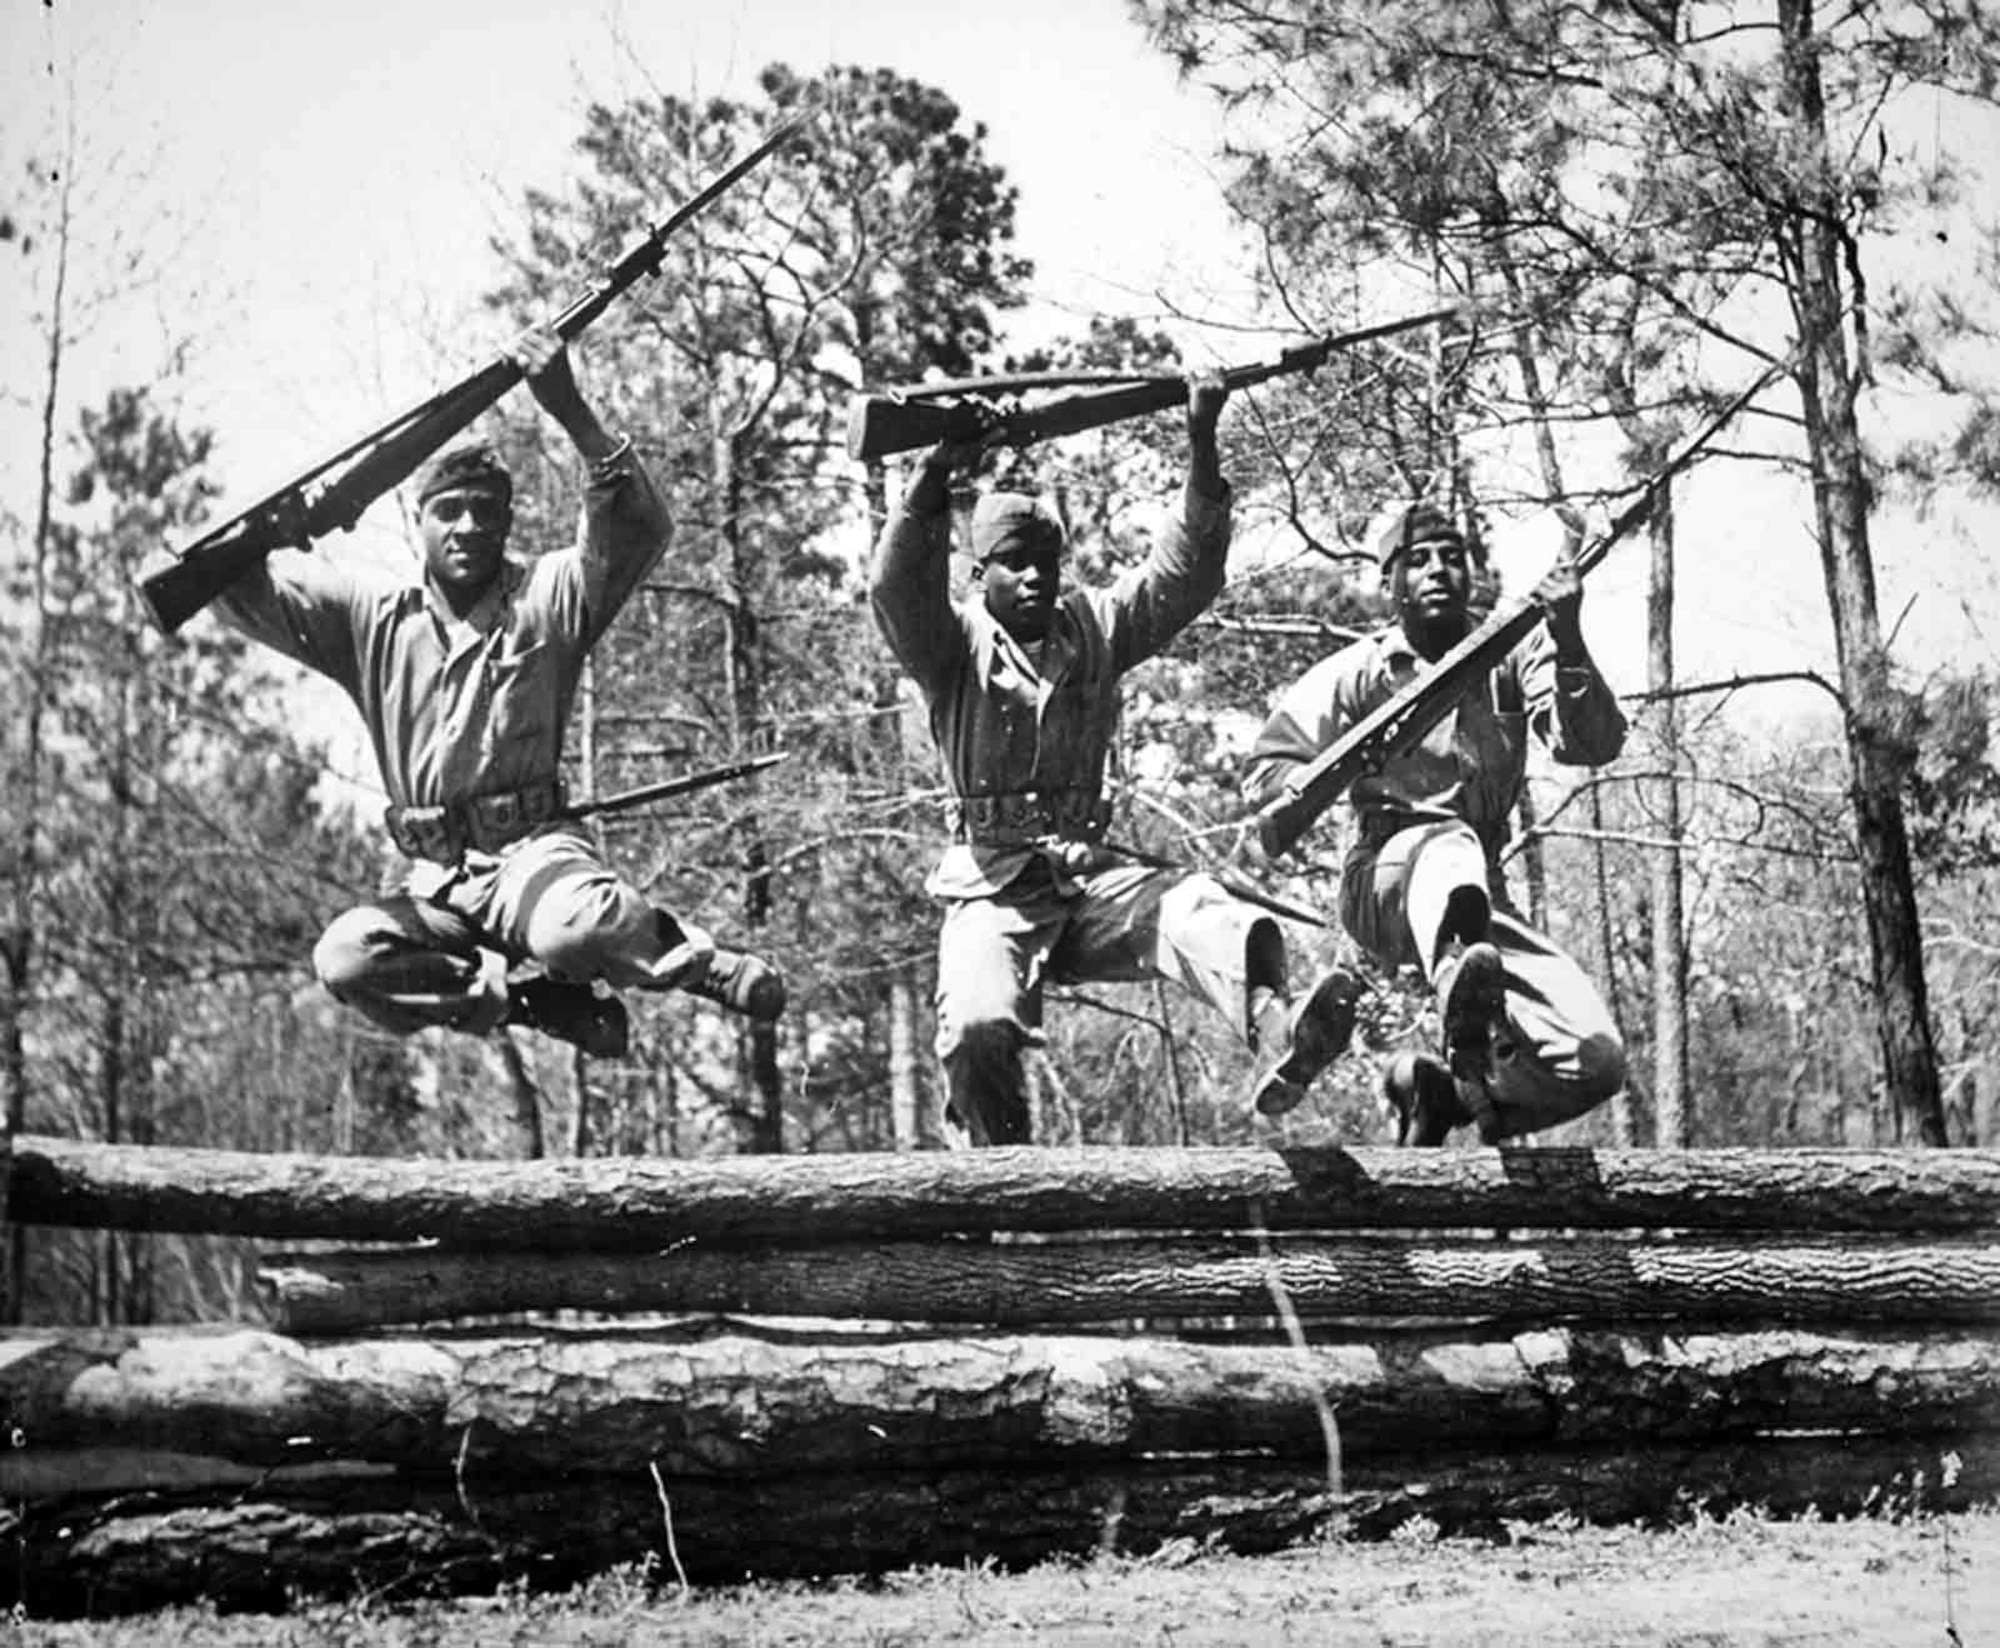 U.S. Marines jump over an obstacle during basic training at Camp Montford Point, N.C. The Marines who visited Langley Air Force Base, Va., July 2, 2013, trained under well-known drill instructors like Sgt. Majs. Gilbert “Hashmark” Johnson and Edgar Huff, and provide a unique insight into a pivotal moment in military history. (Courtesy photo/Released)